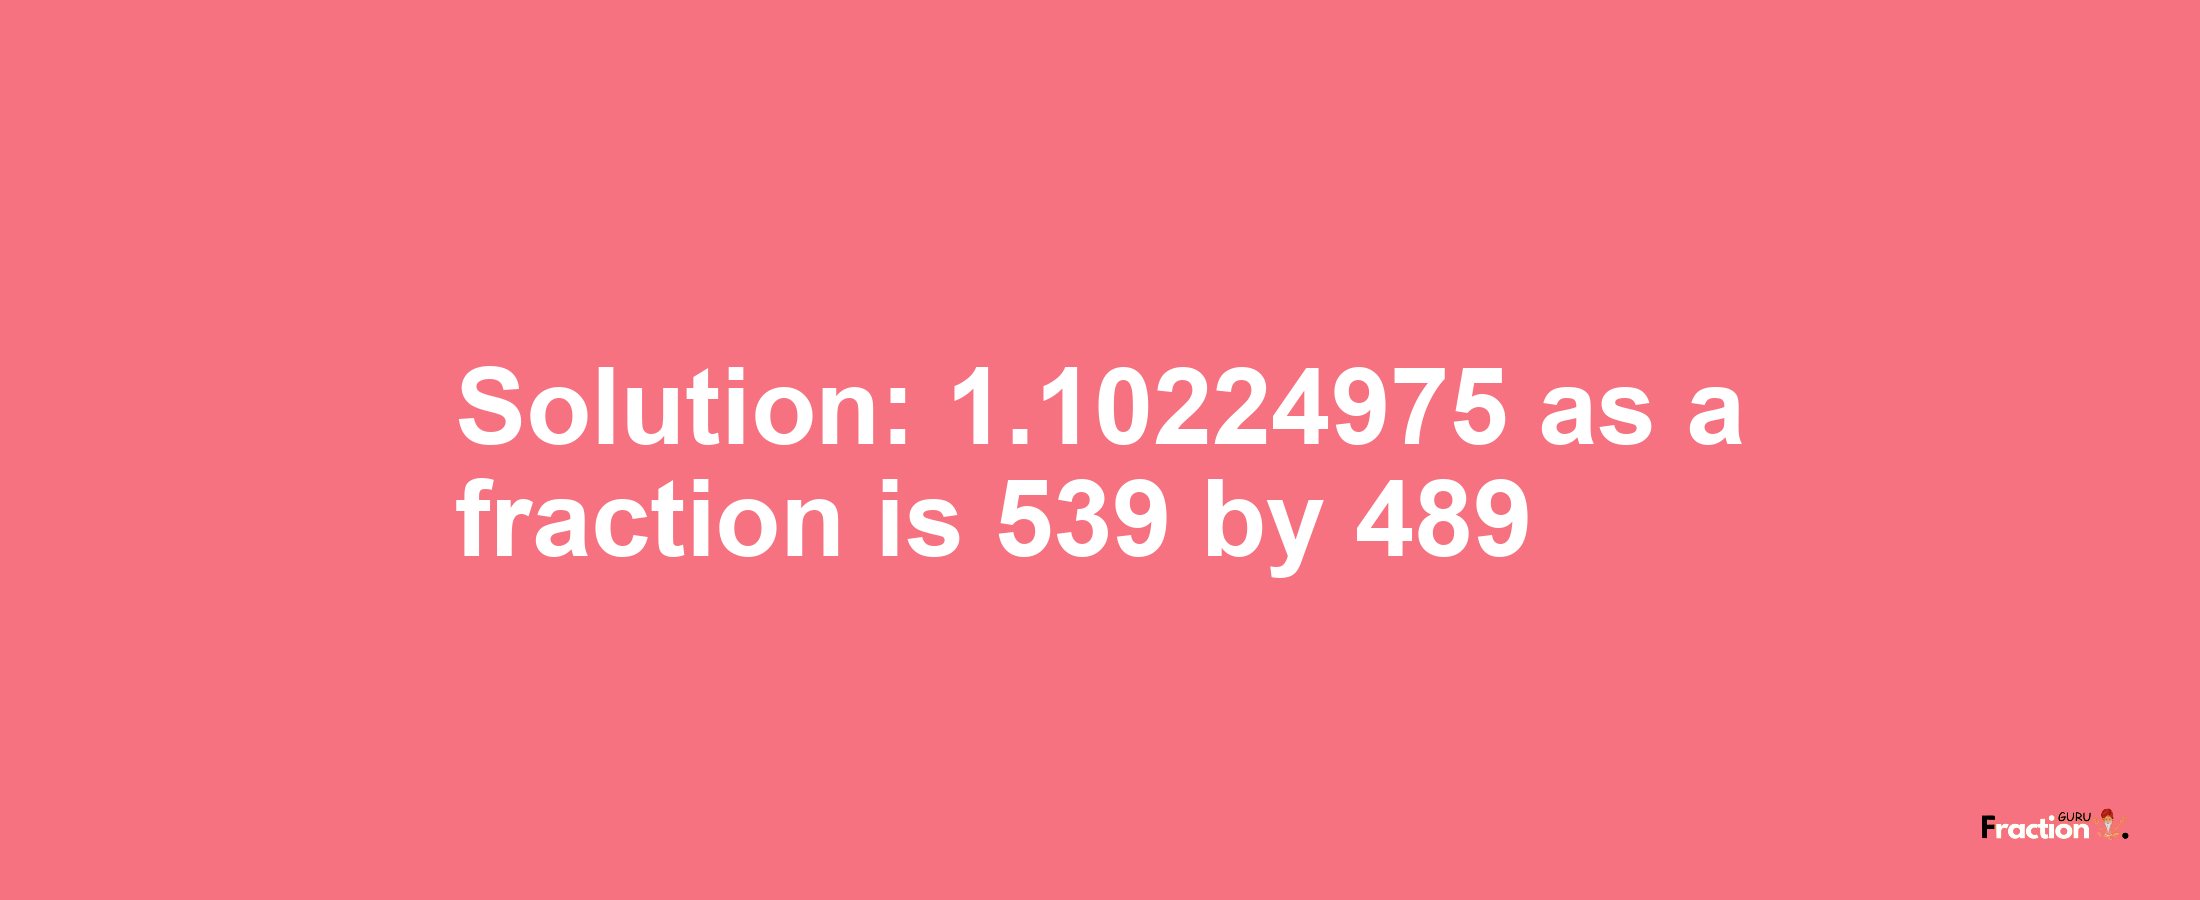 Solution:1.10224975 as a fraction is 539/489